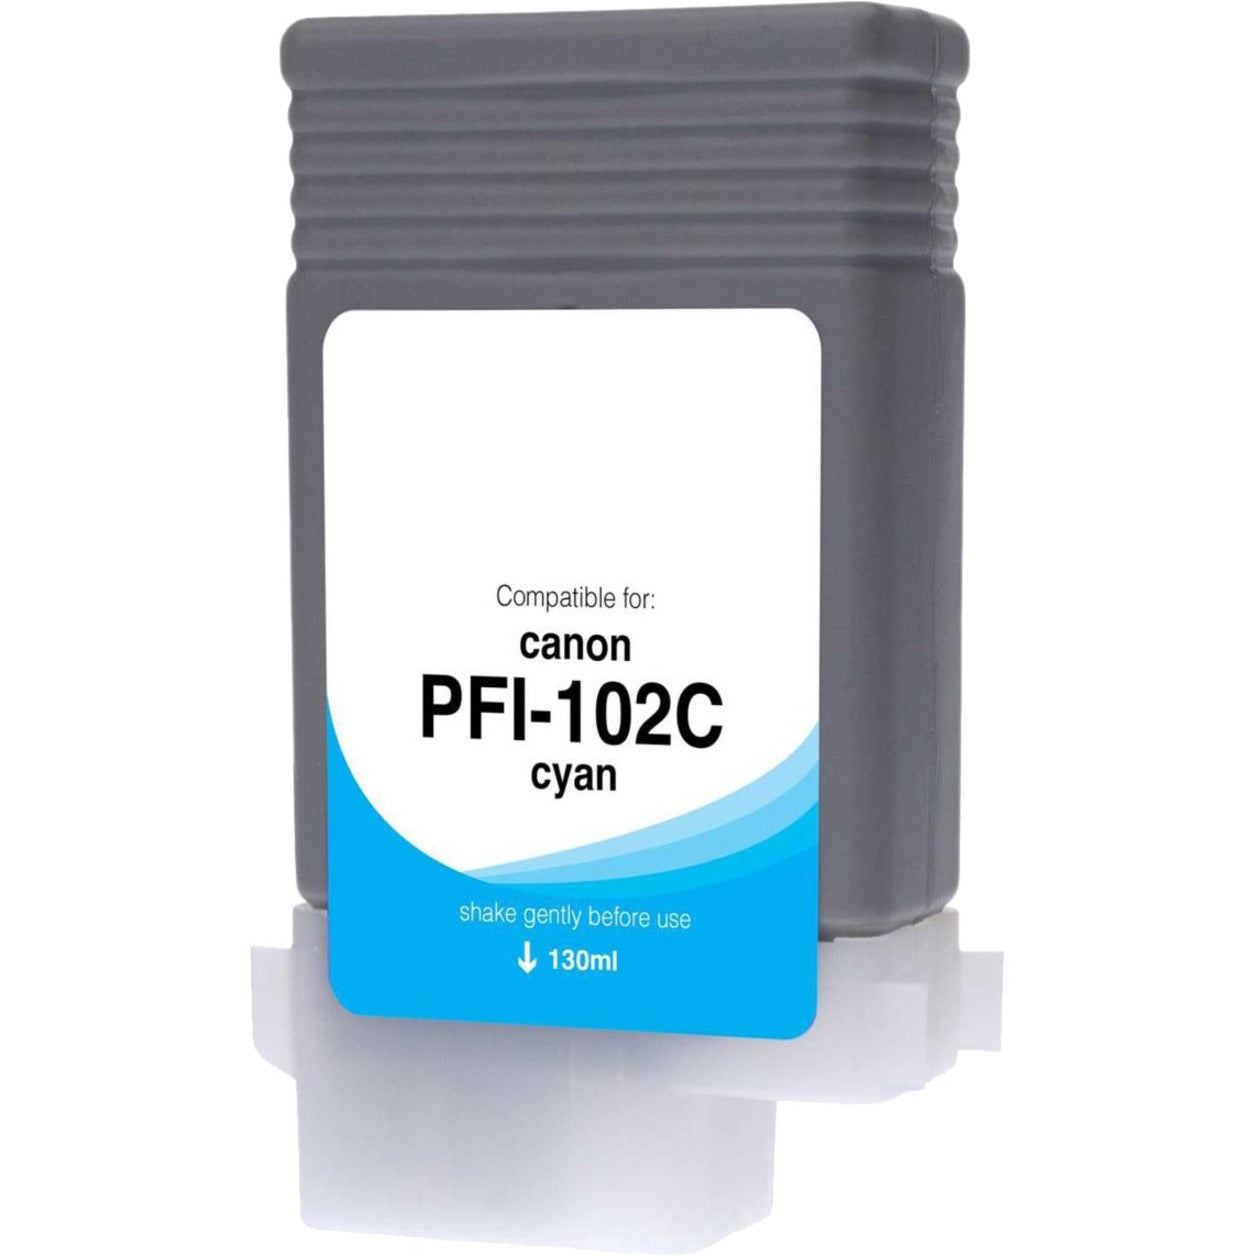 Clover Technologies WCPFI102C WF Non-OEM New Cyan Wide Format Ink Cartridge for Canon PFI-102, Compatible with Canon Printers